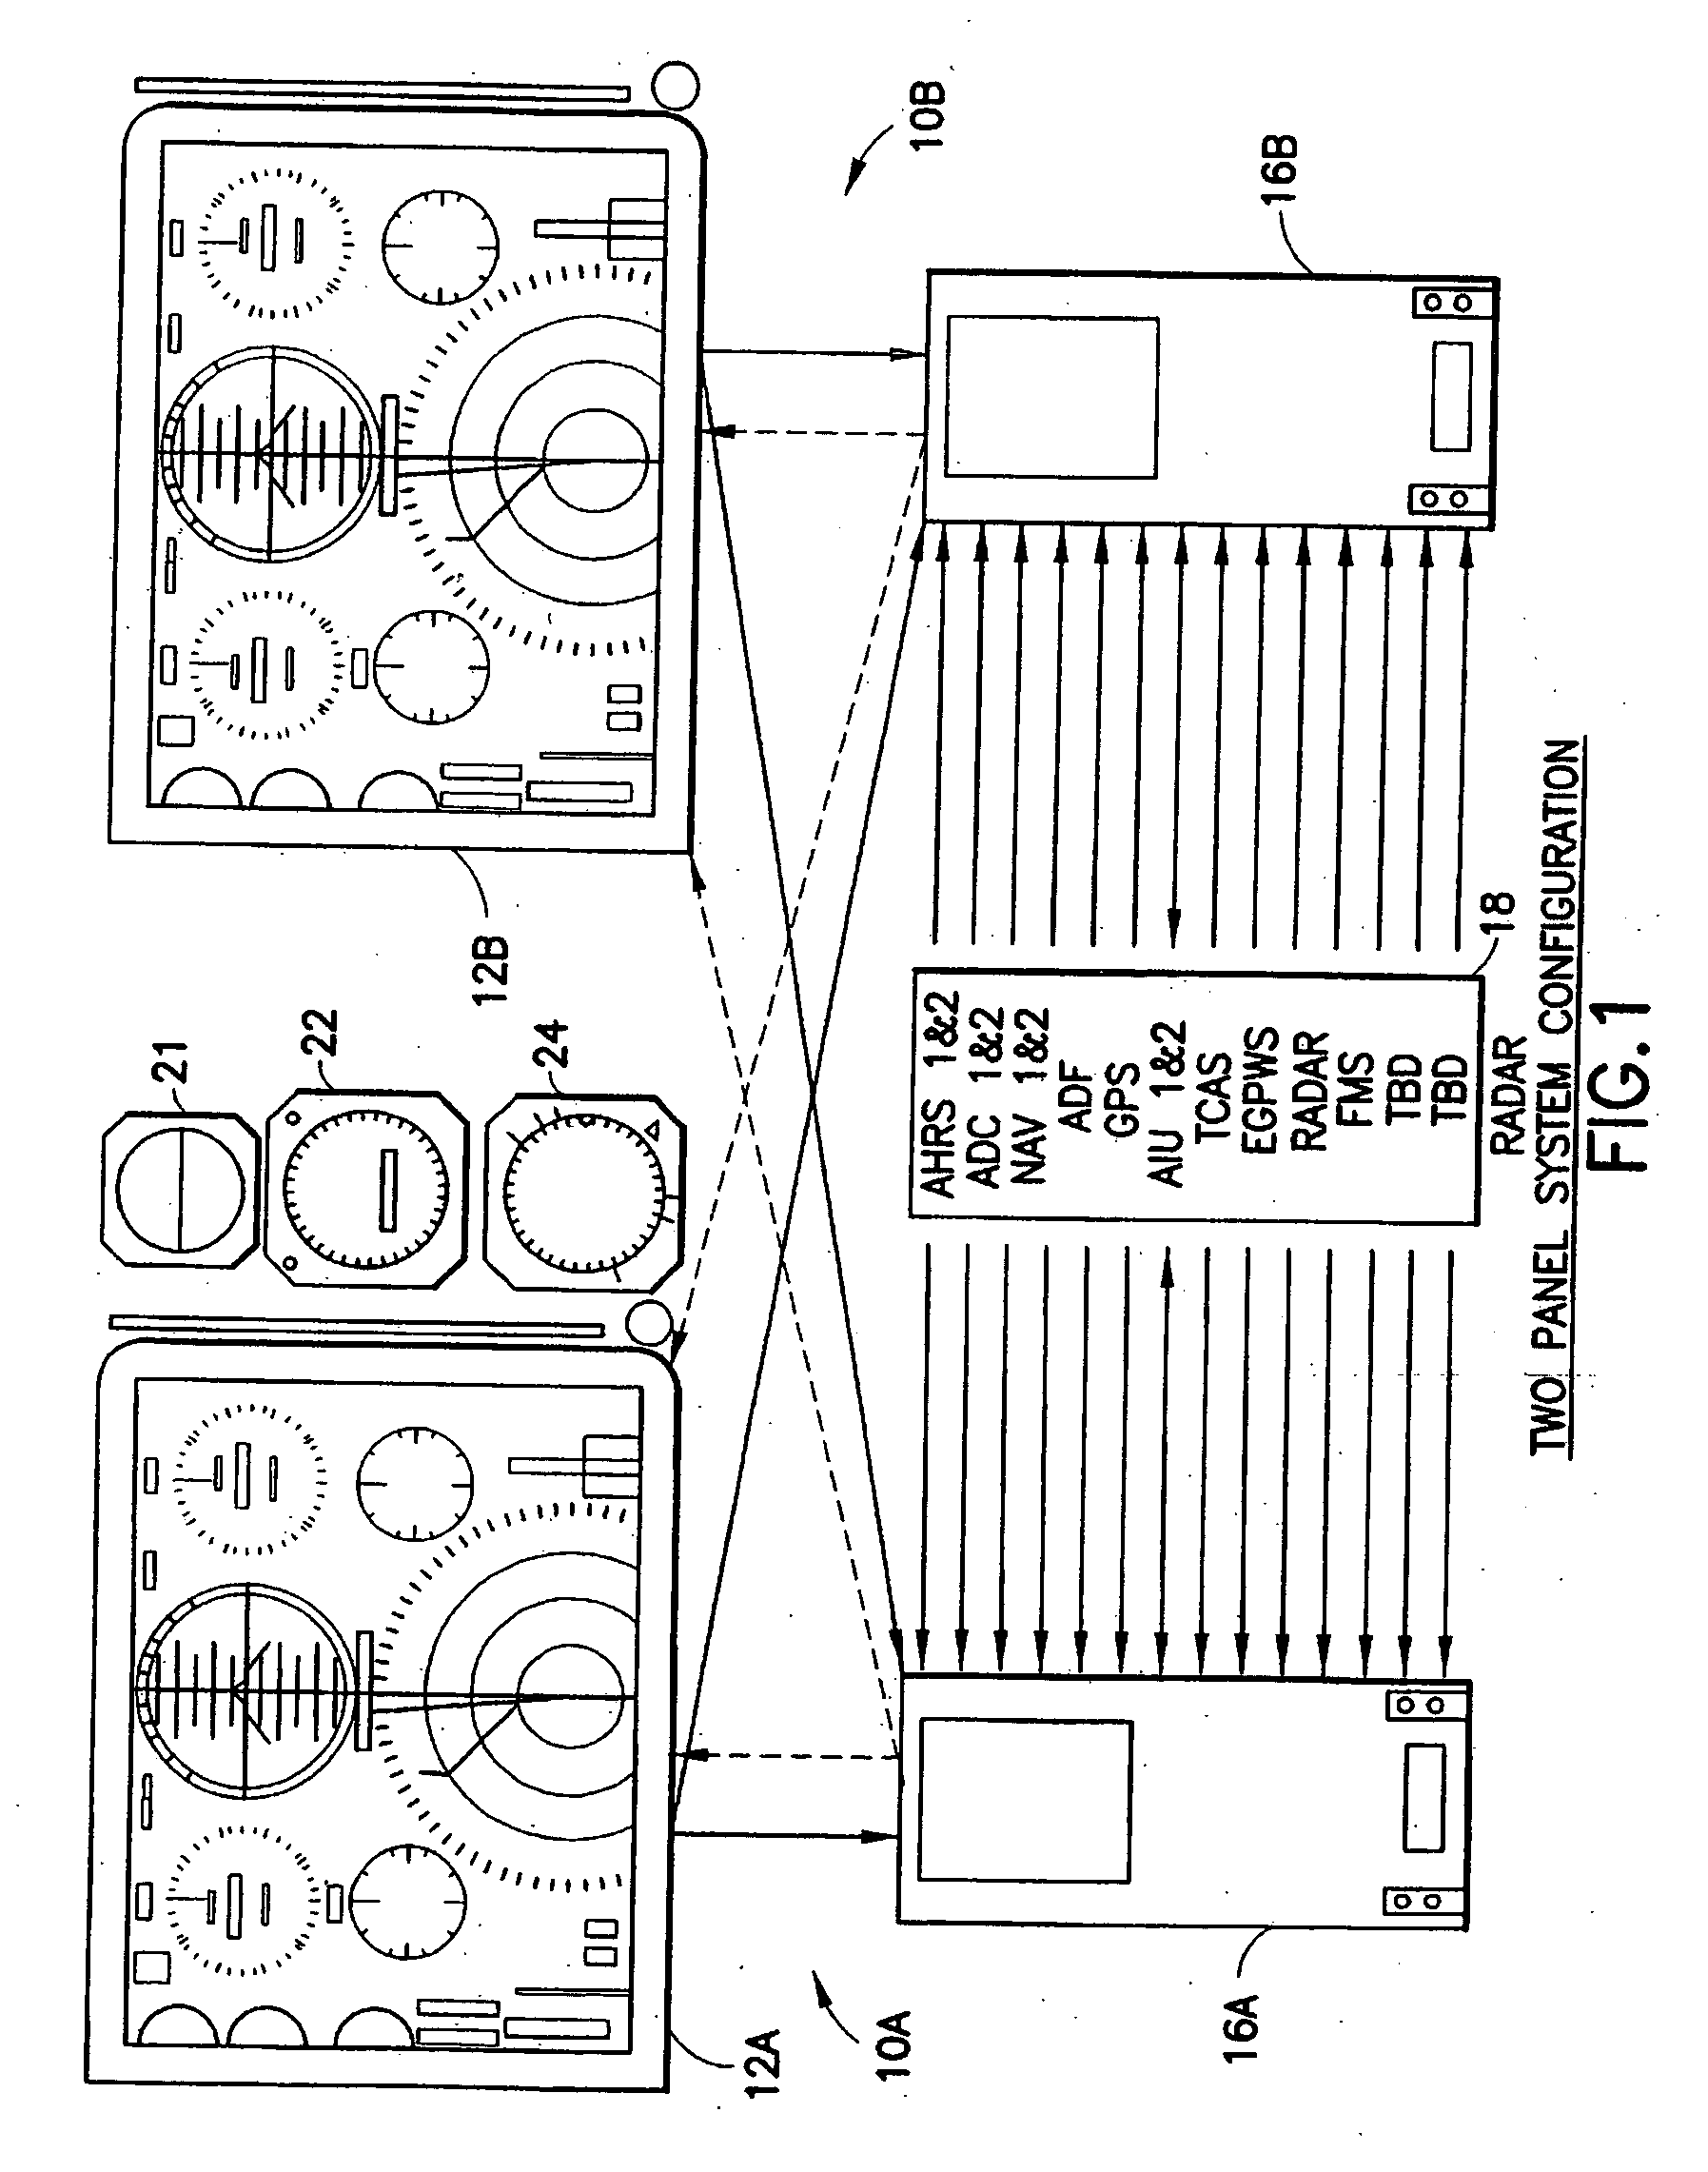 Aircraft flat panel display system with graphical image integrity